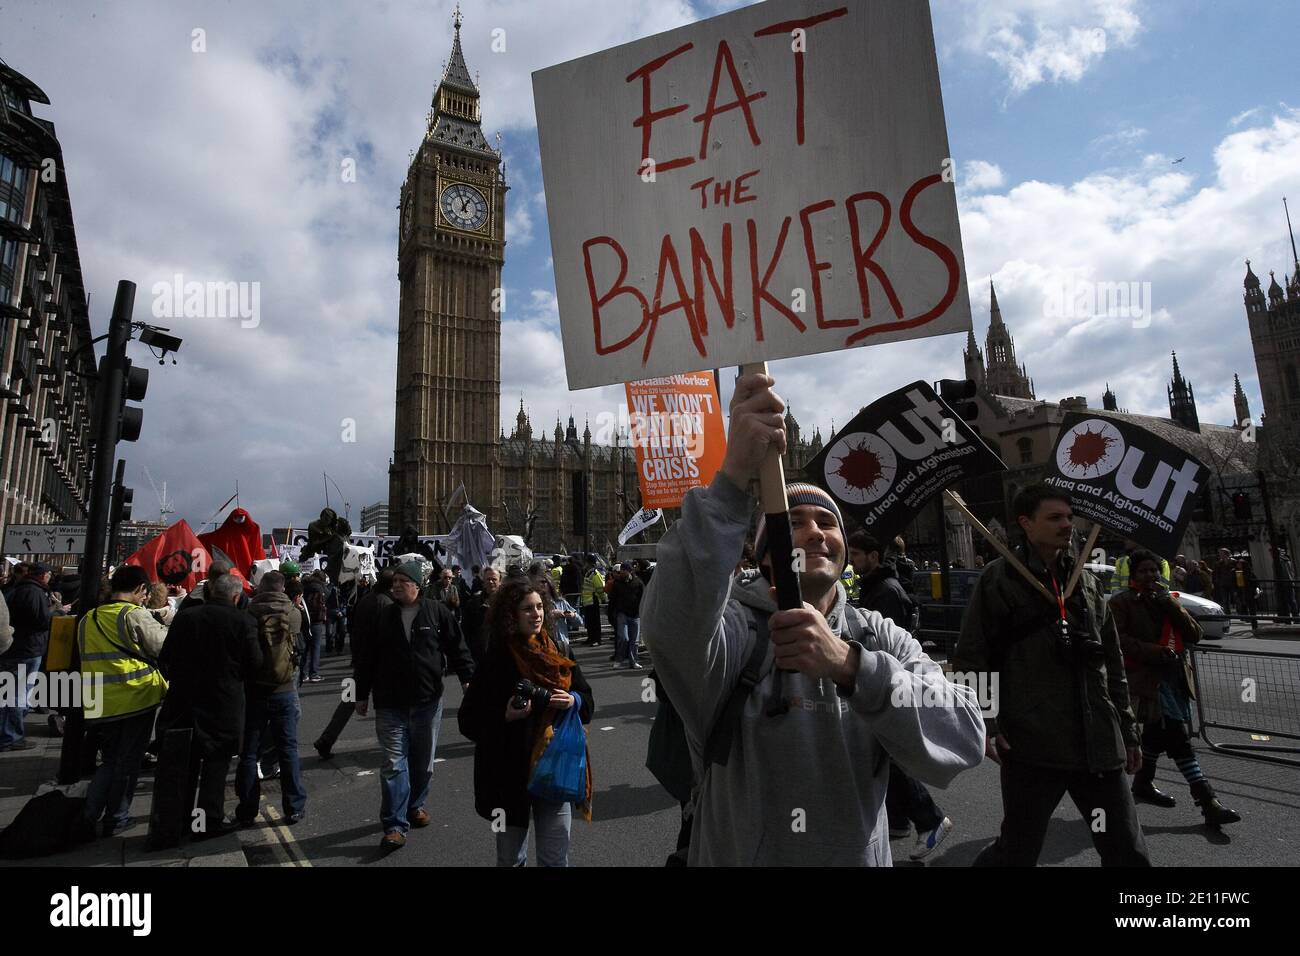 GREAT BRITAIN / England / London /A protester holds a sing 'Eat the Bankers' on March 28, 2009 in London, England. Stock Photo